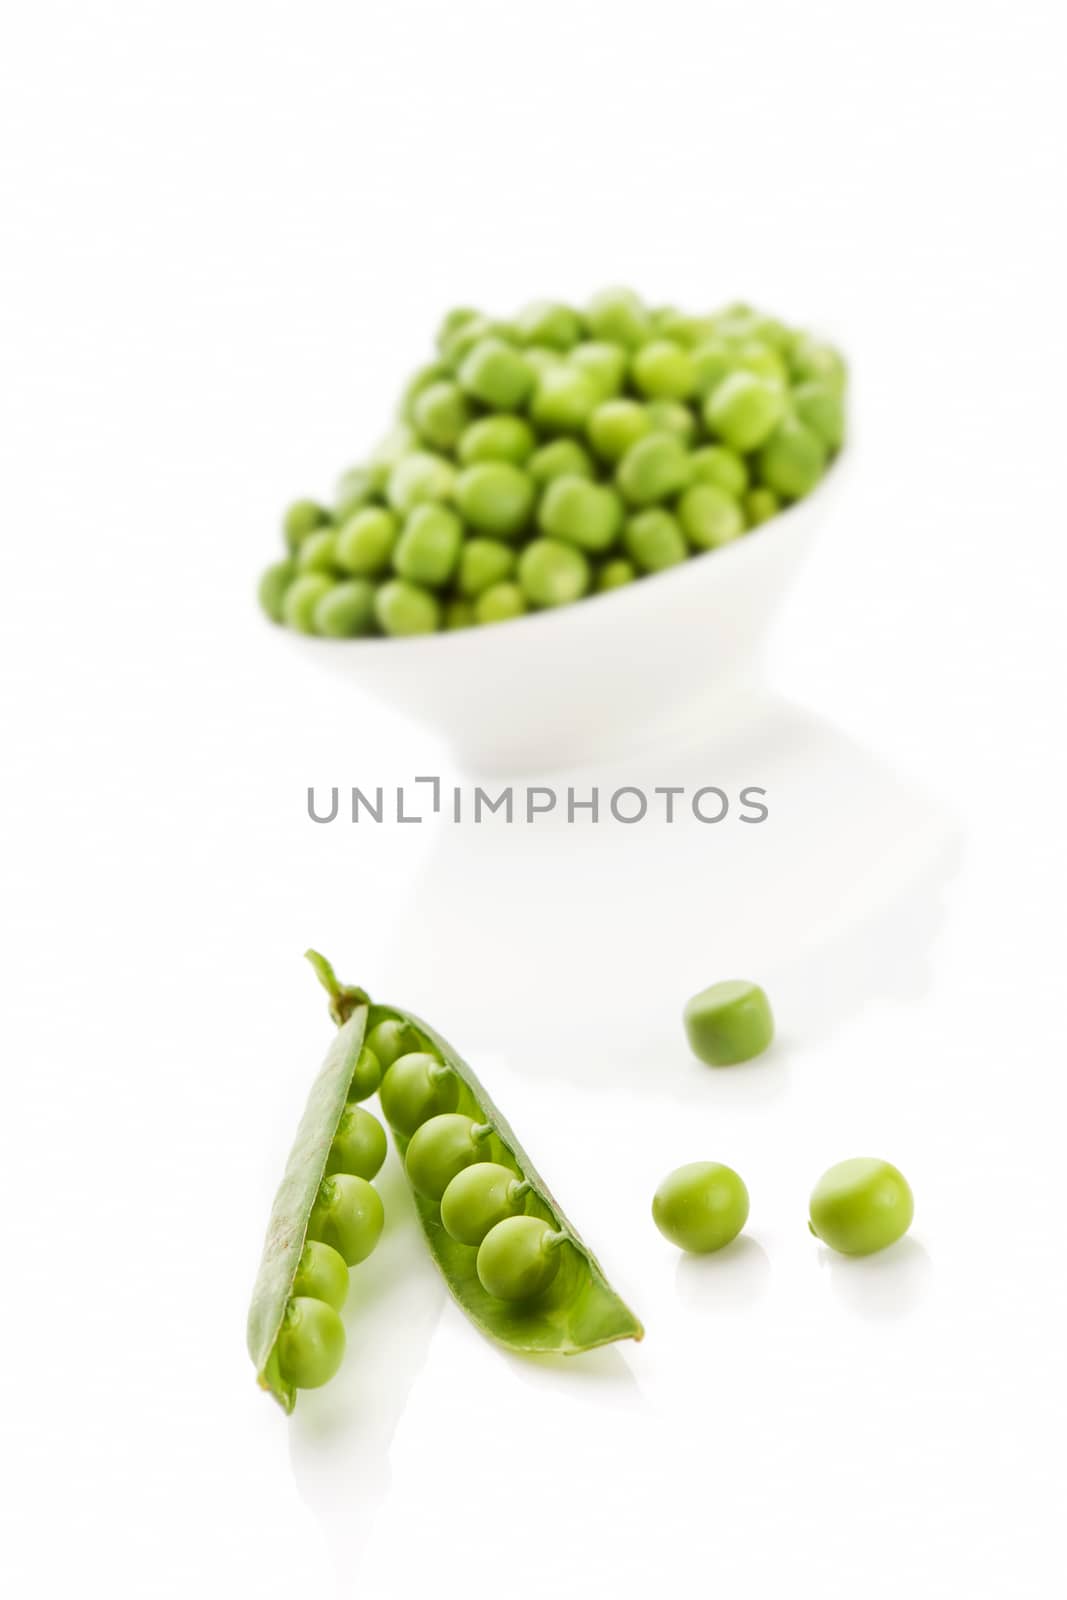 Pea pod and peas in bowl isolated on white background. Culinary summer legume vegetable. 